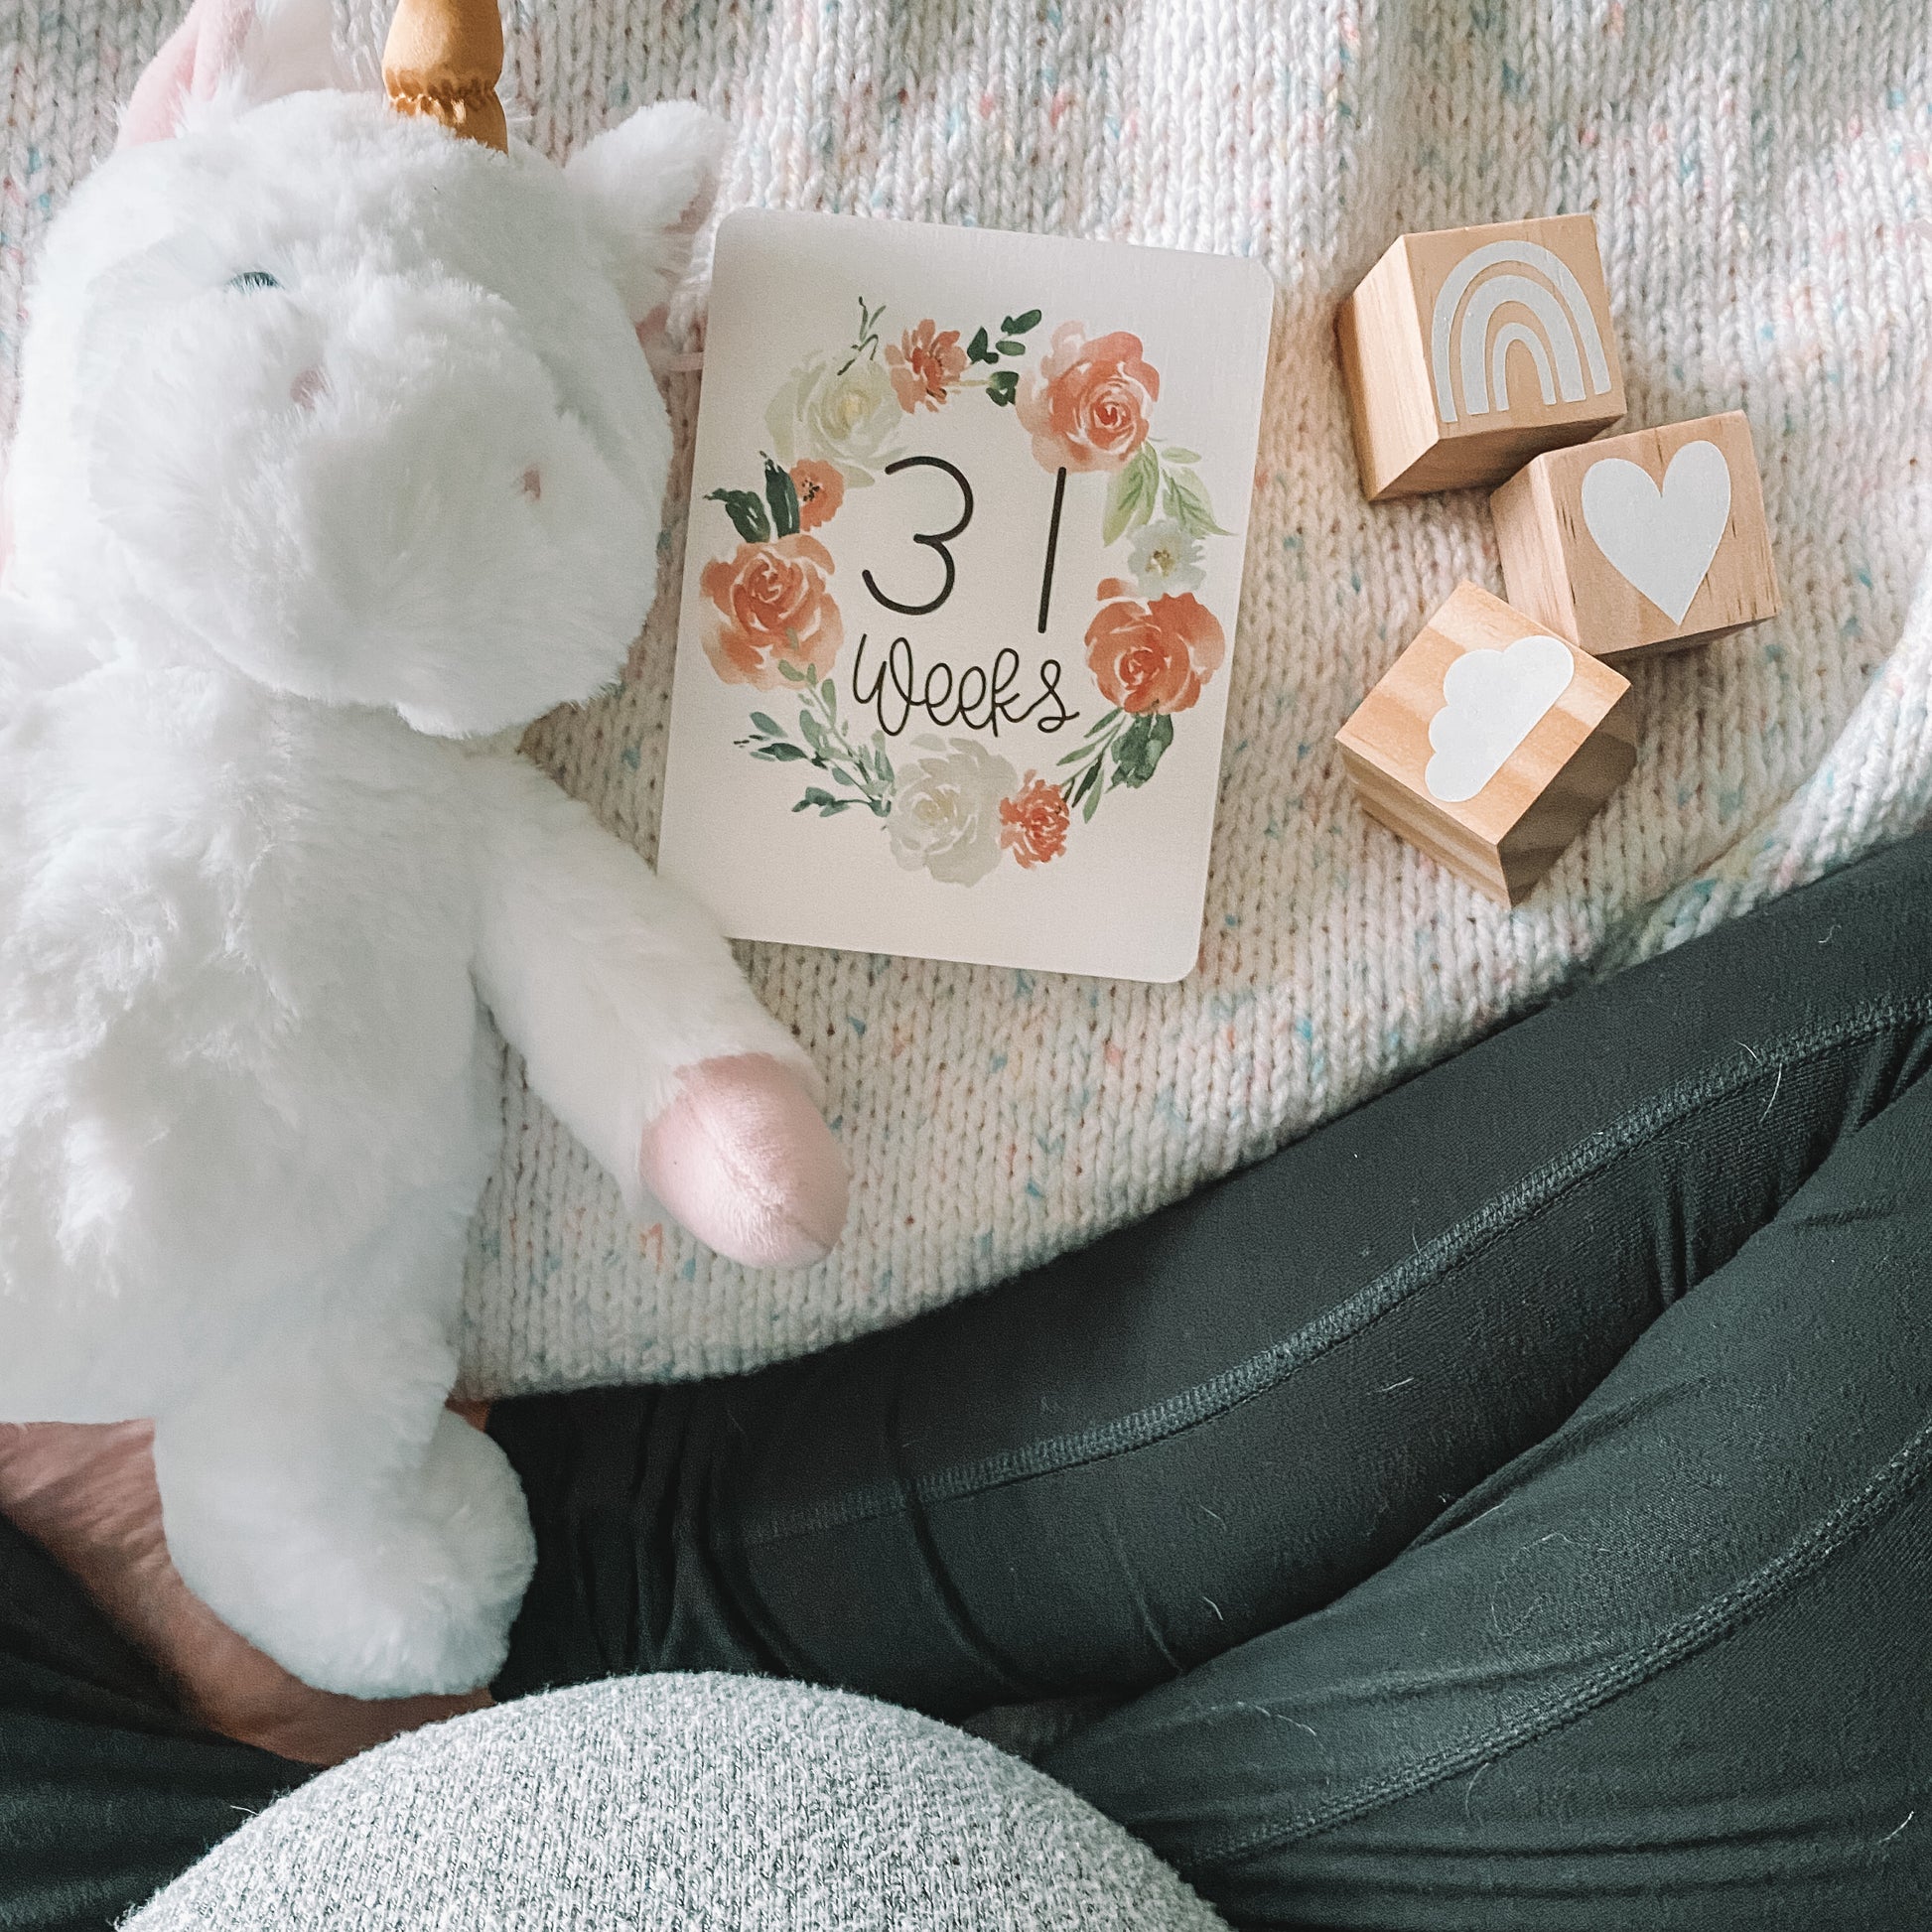 View of pregnant belly with a 31 week milestone card, unicorn stuffed animal, and blocks laid on a blanket in front.